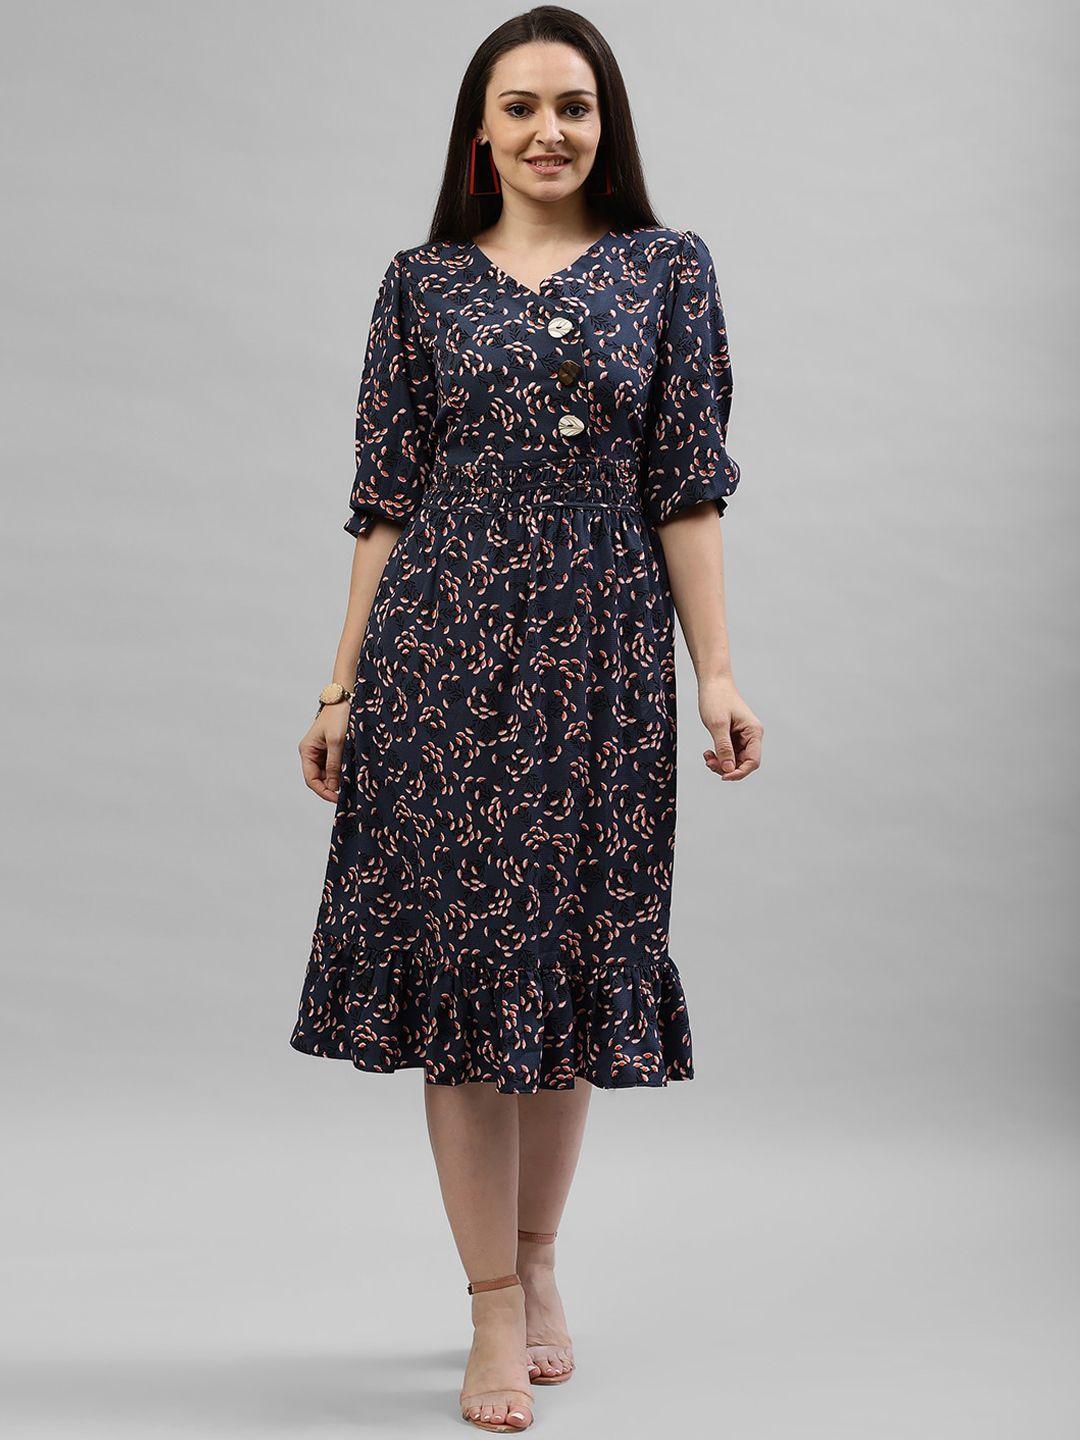 kassually women navy blue floral printed fit and flare dress